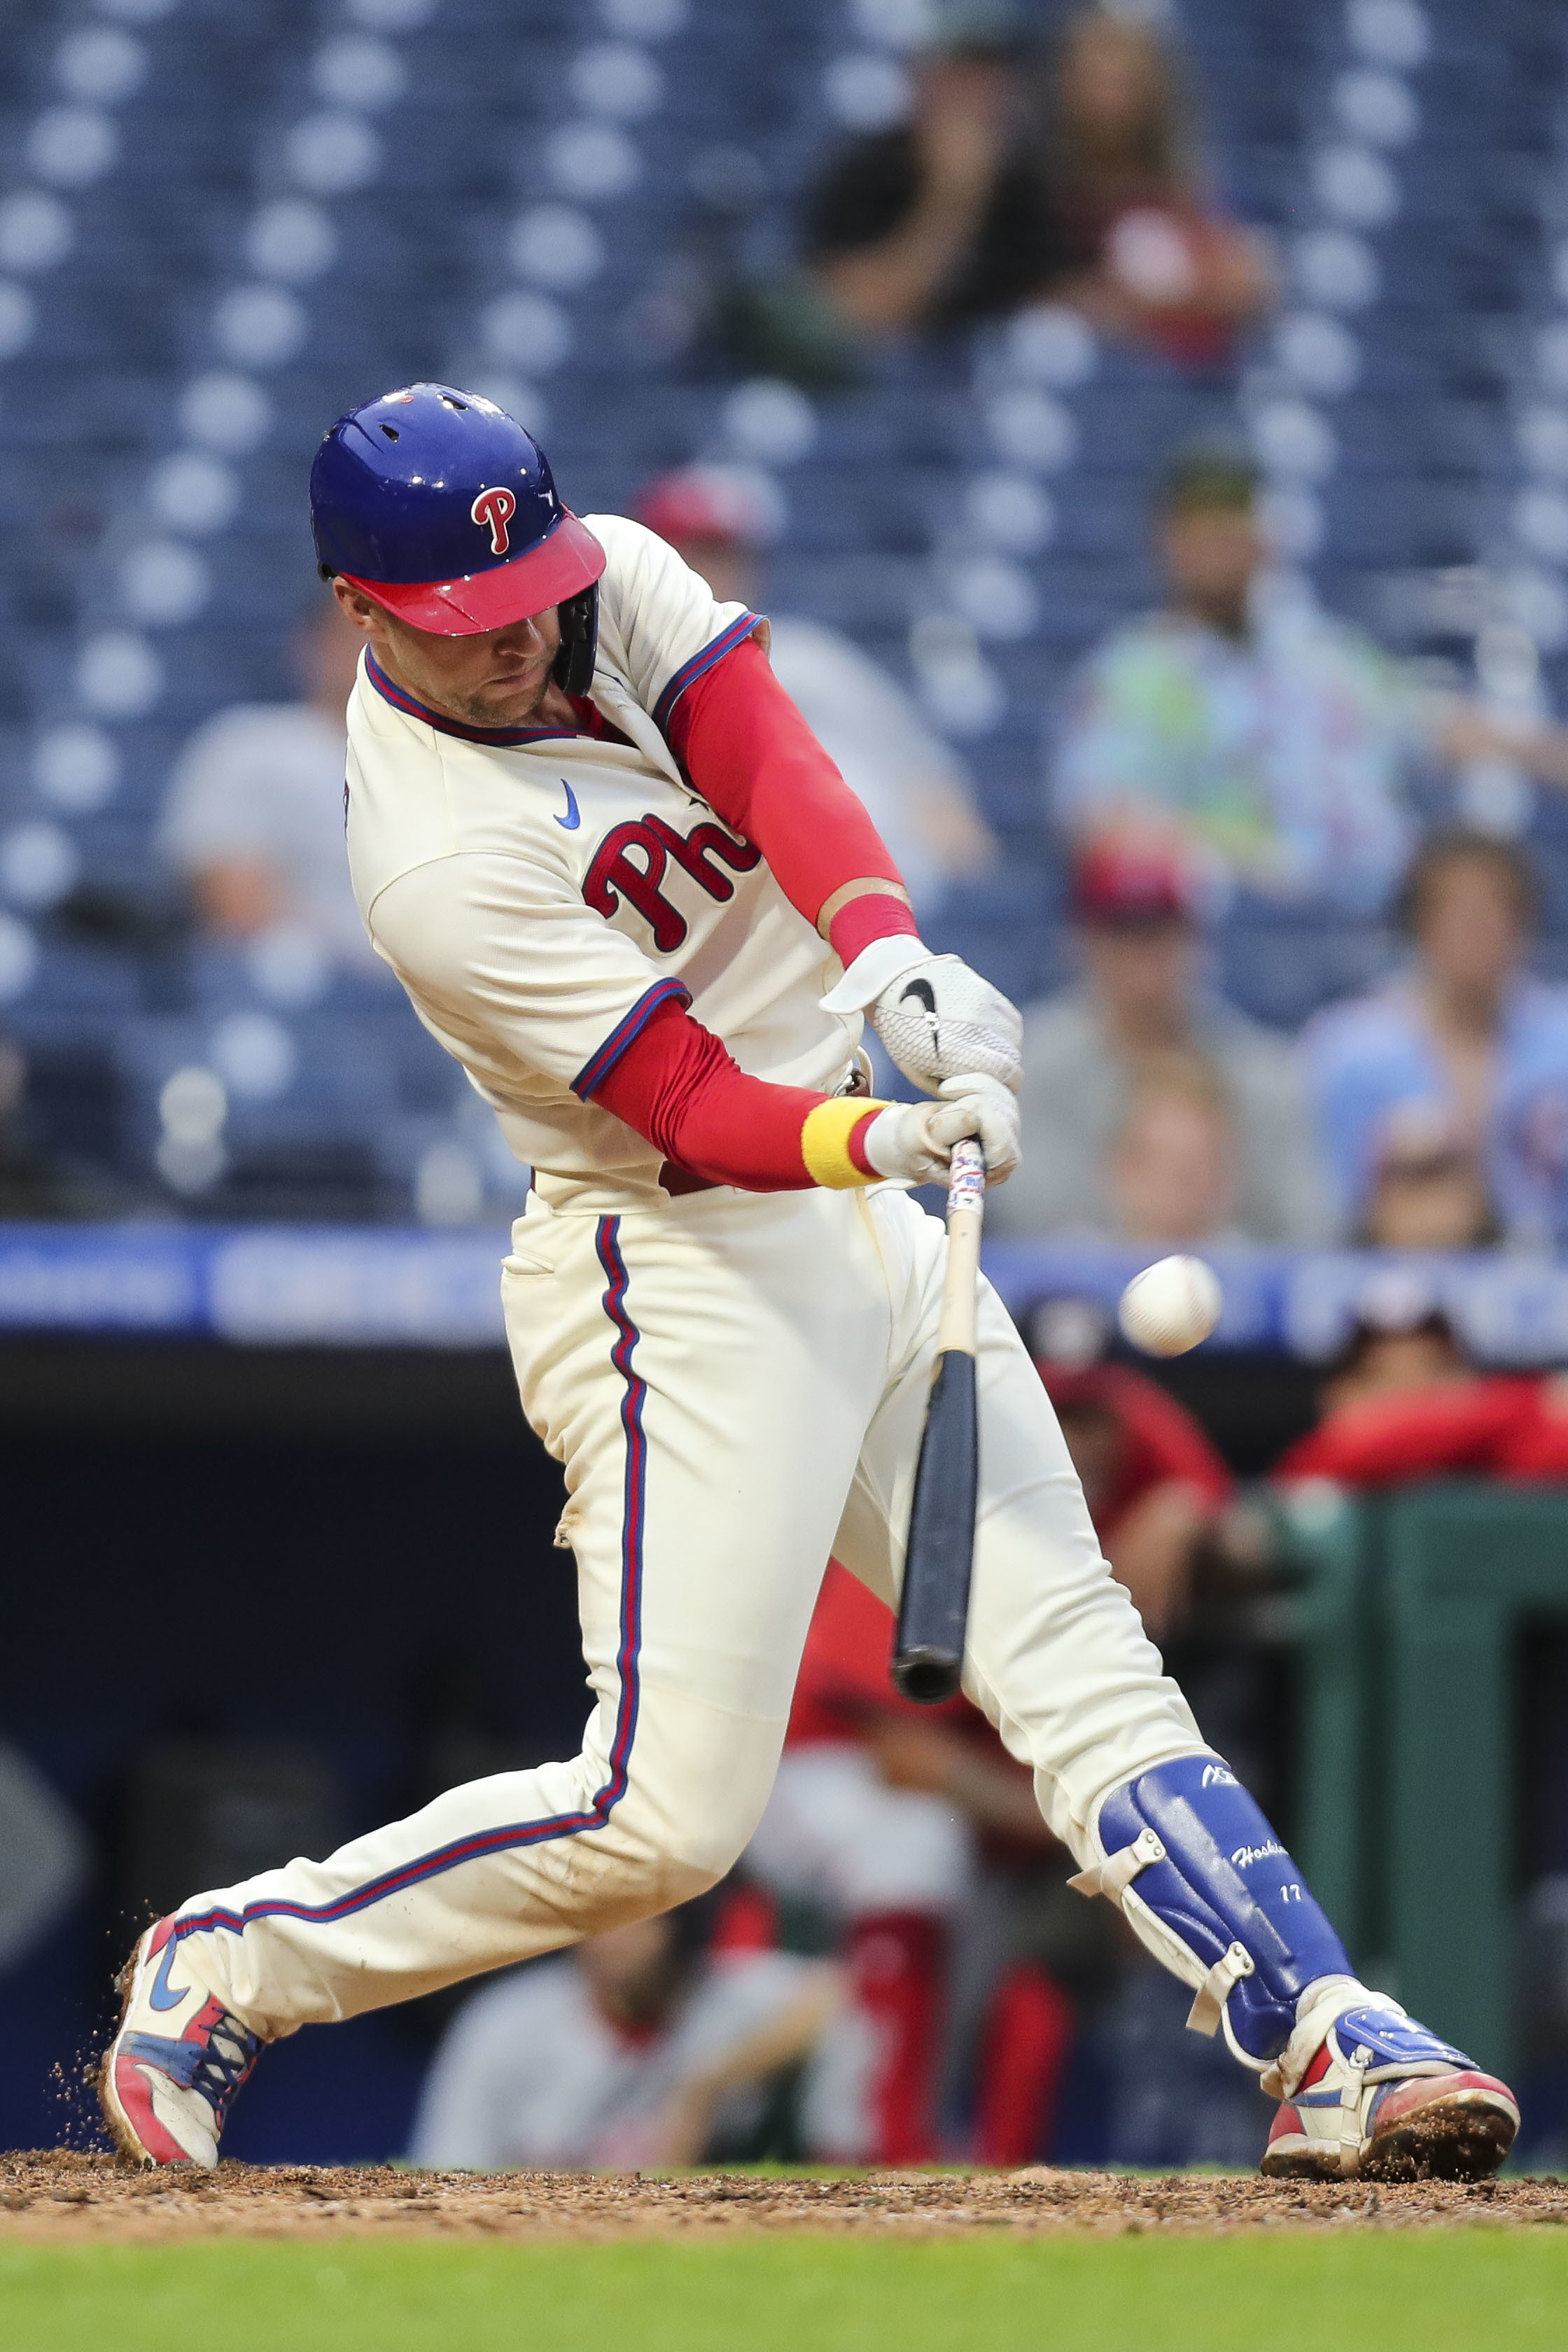 Rhys Hoskins is surging at the right time for the Phillies – Philly Sports